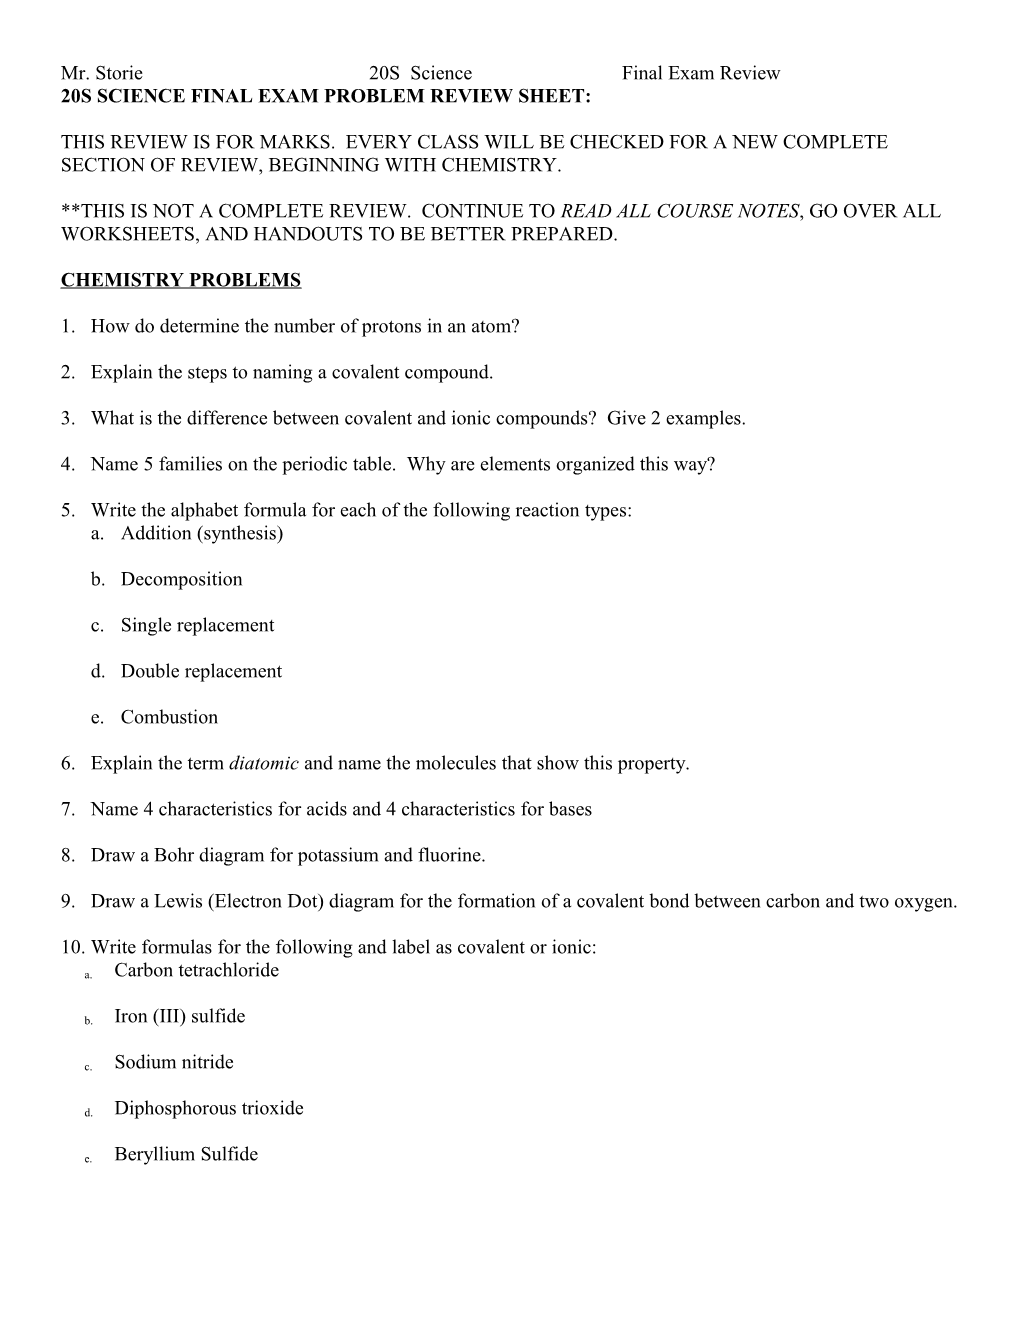 20S Science Final Exam Problem Review Sheet